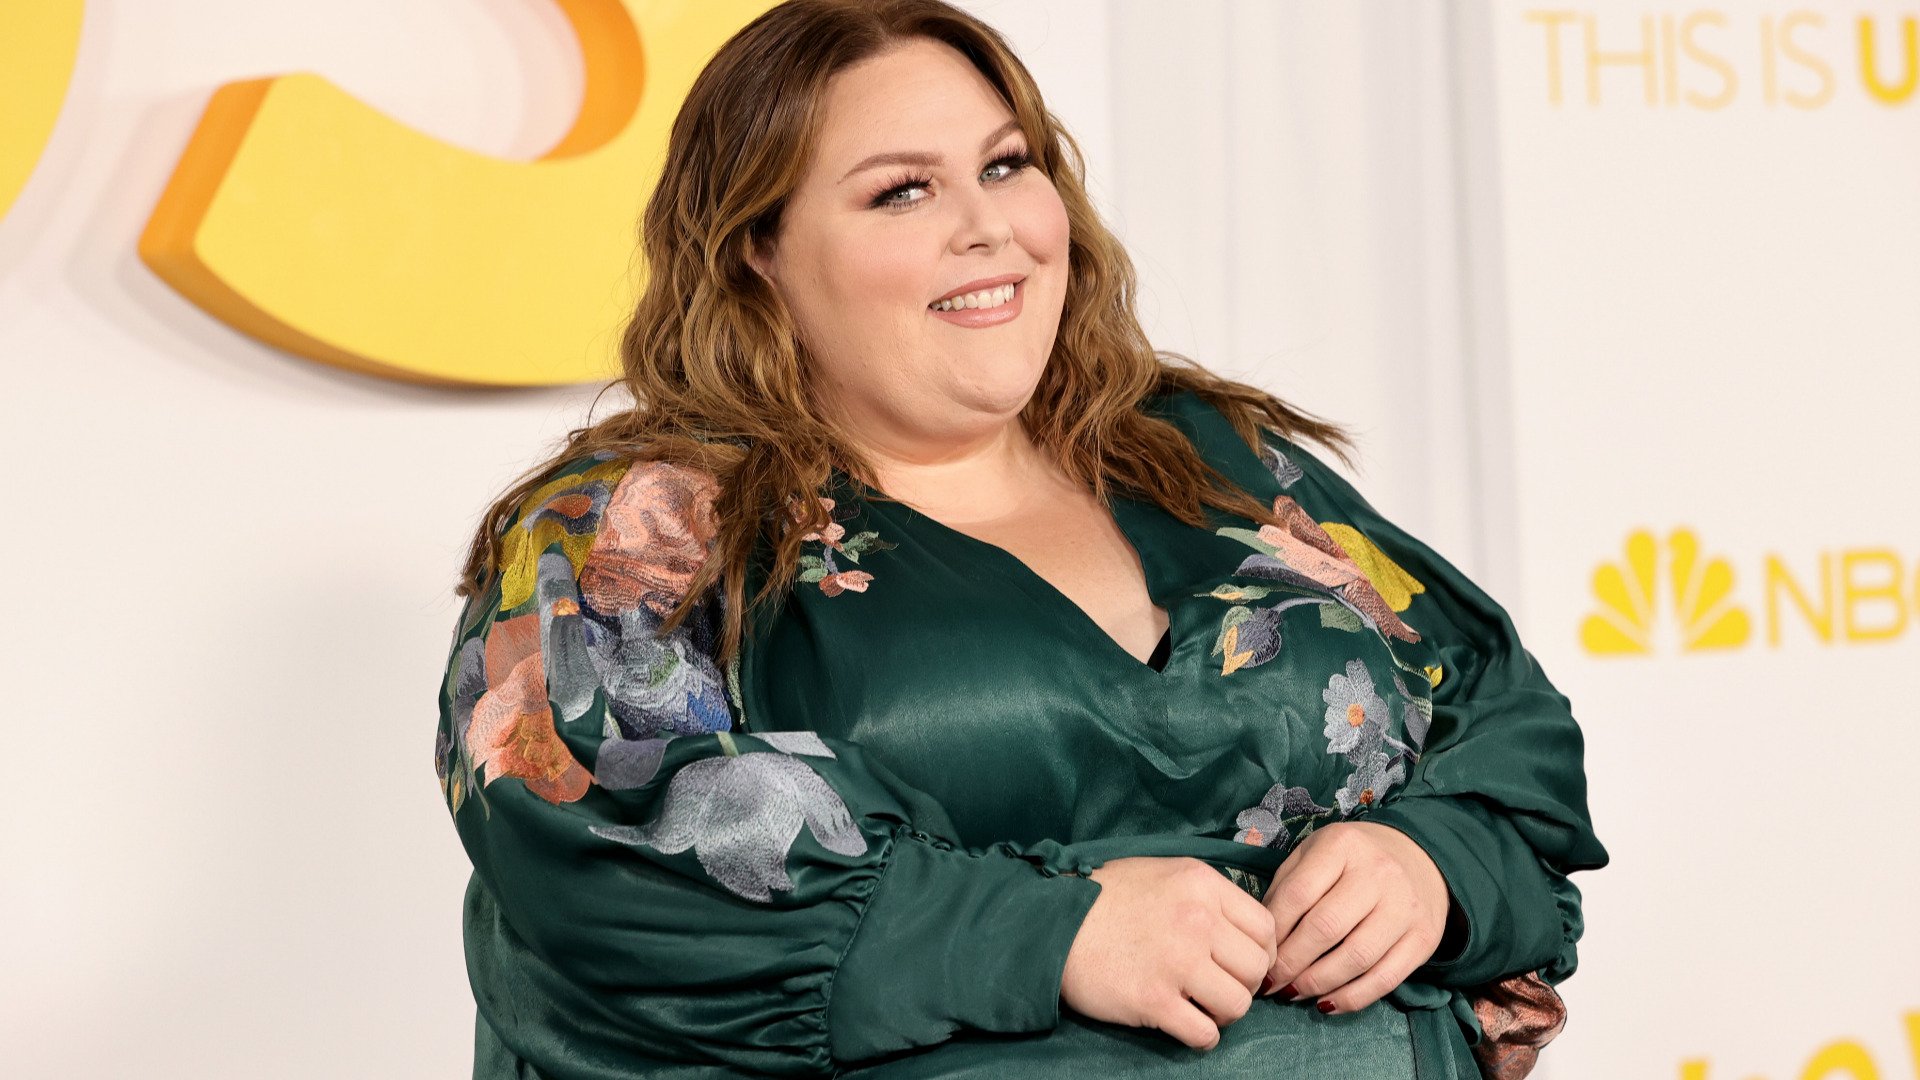 Chrissy Metz poses at the ‘This Is Us’ Season 6 premiere red carpet event in December 2021